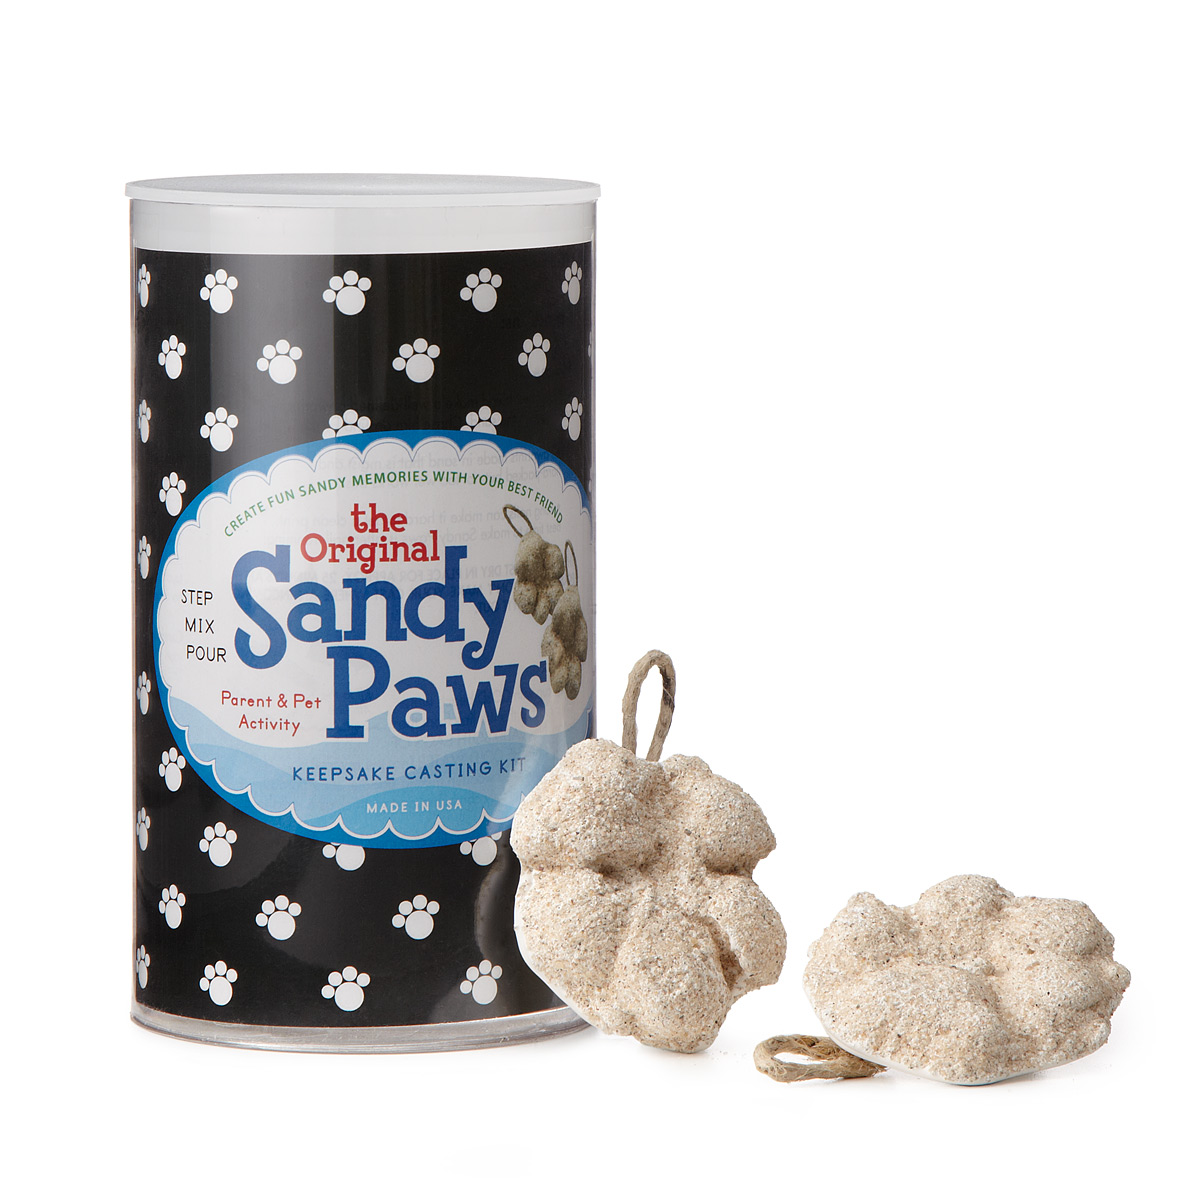 Make a sandy paws cast of your dog's paw.